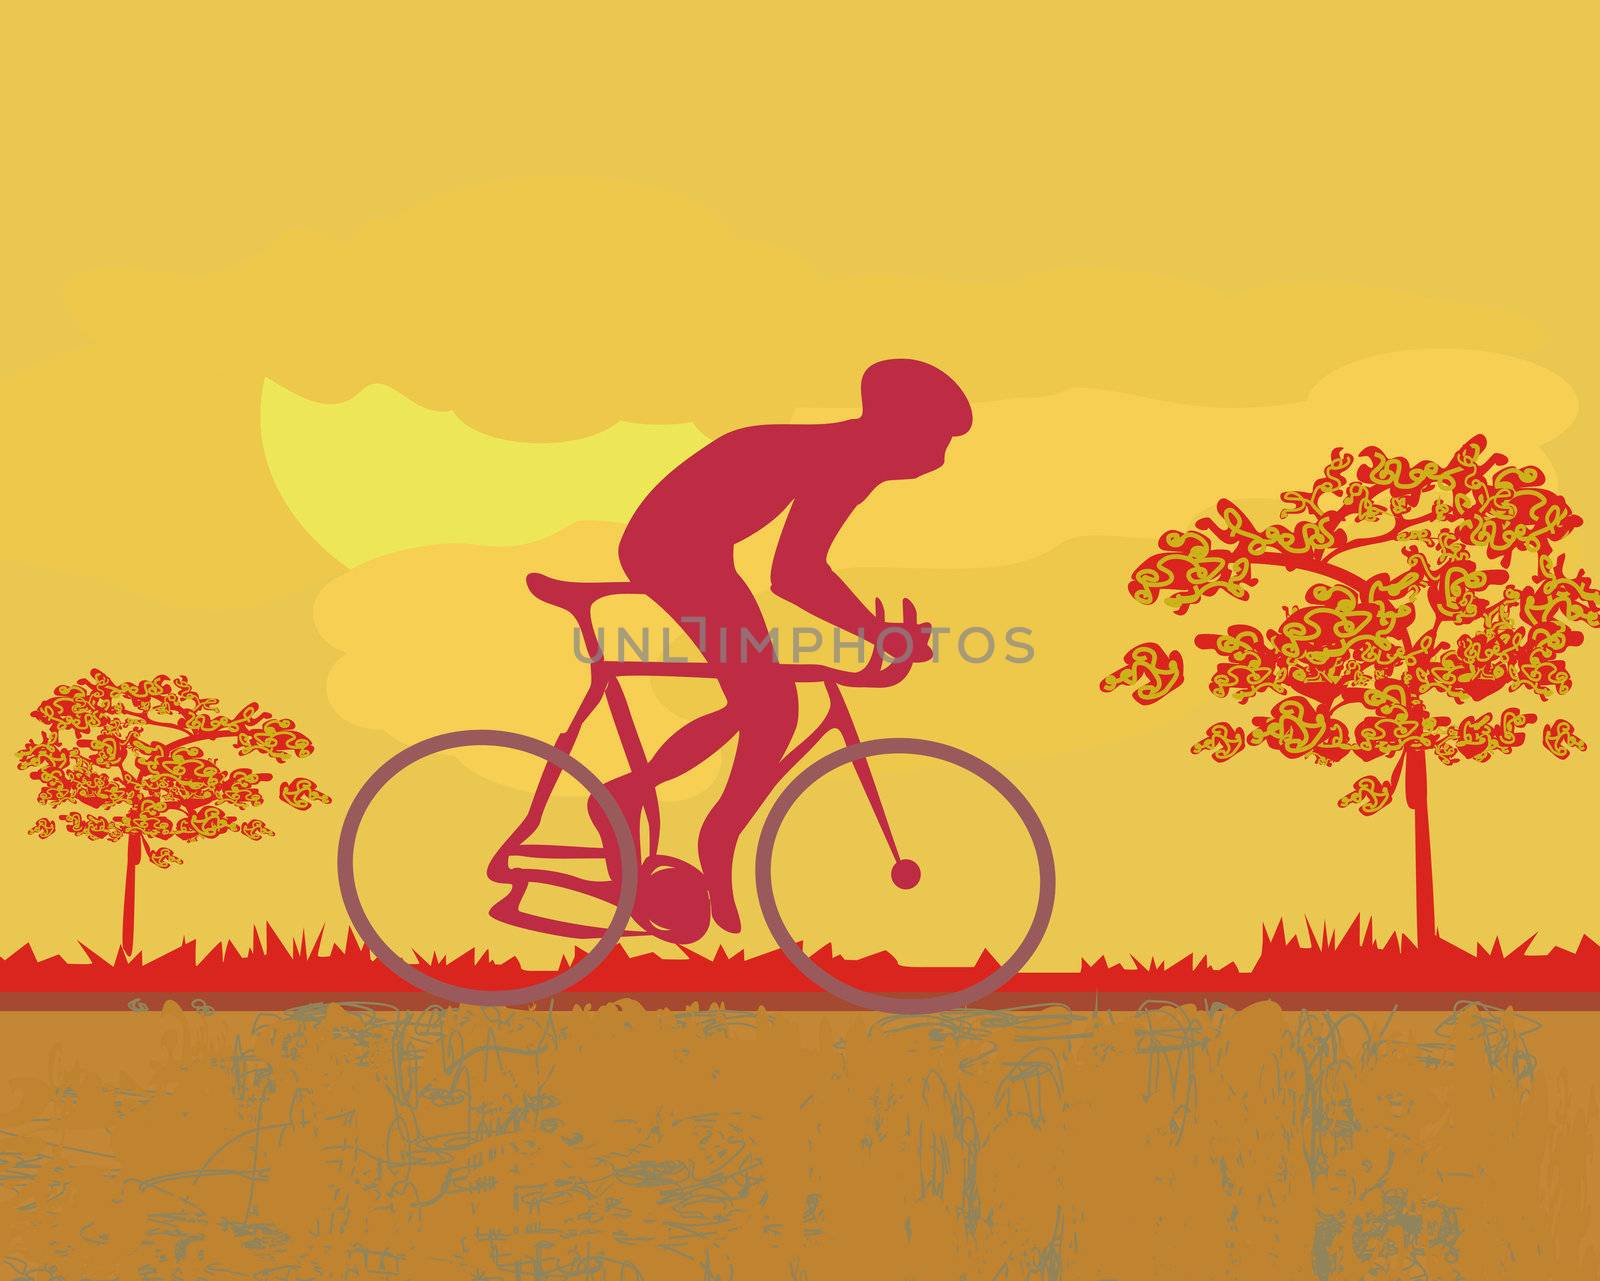 Cycling Grunge Poster Template vector by JackyBrown